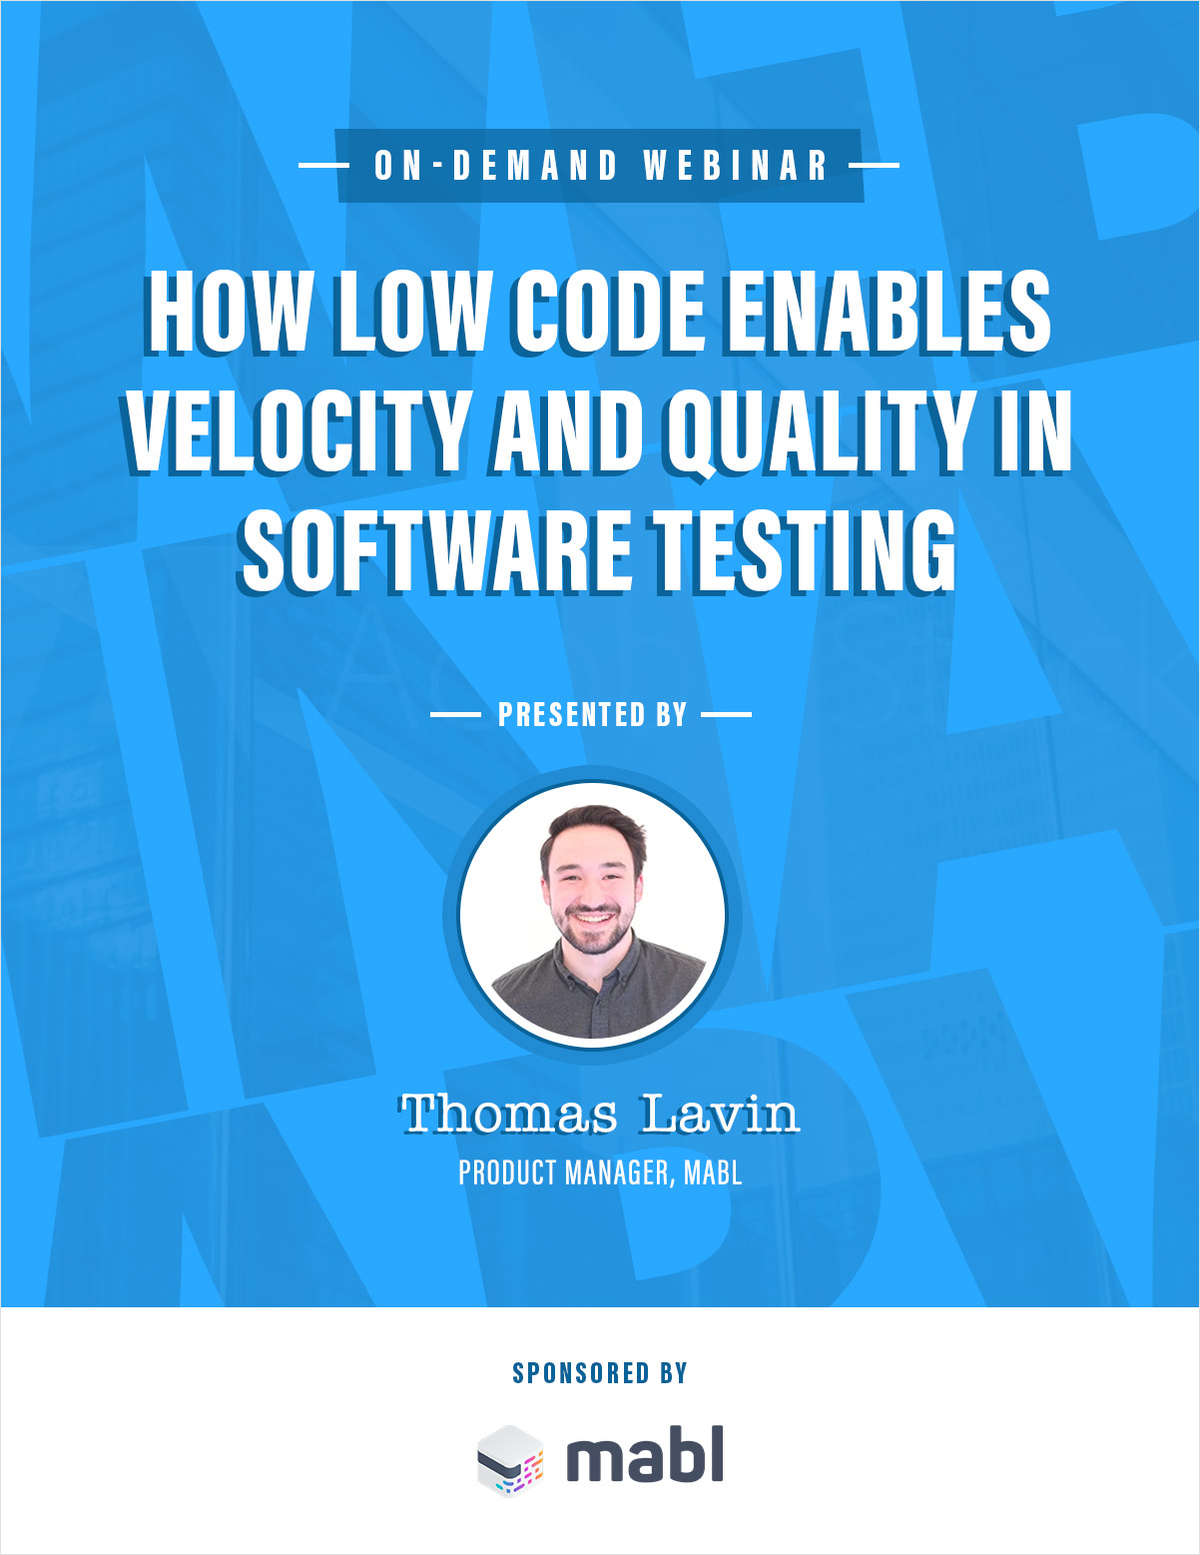 How Low Code Enables Velocity and Quality in Software Testing